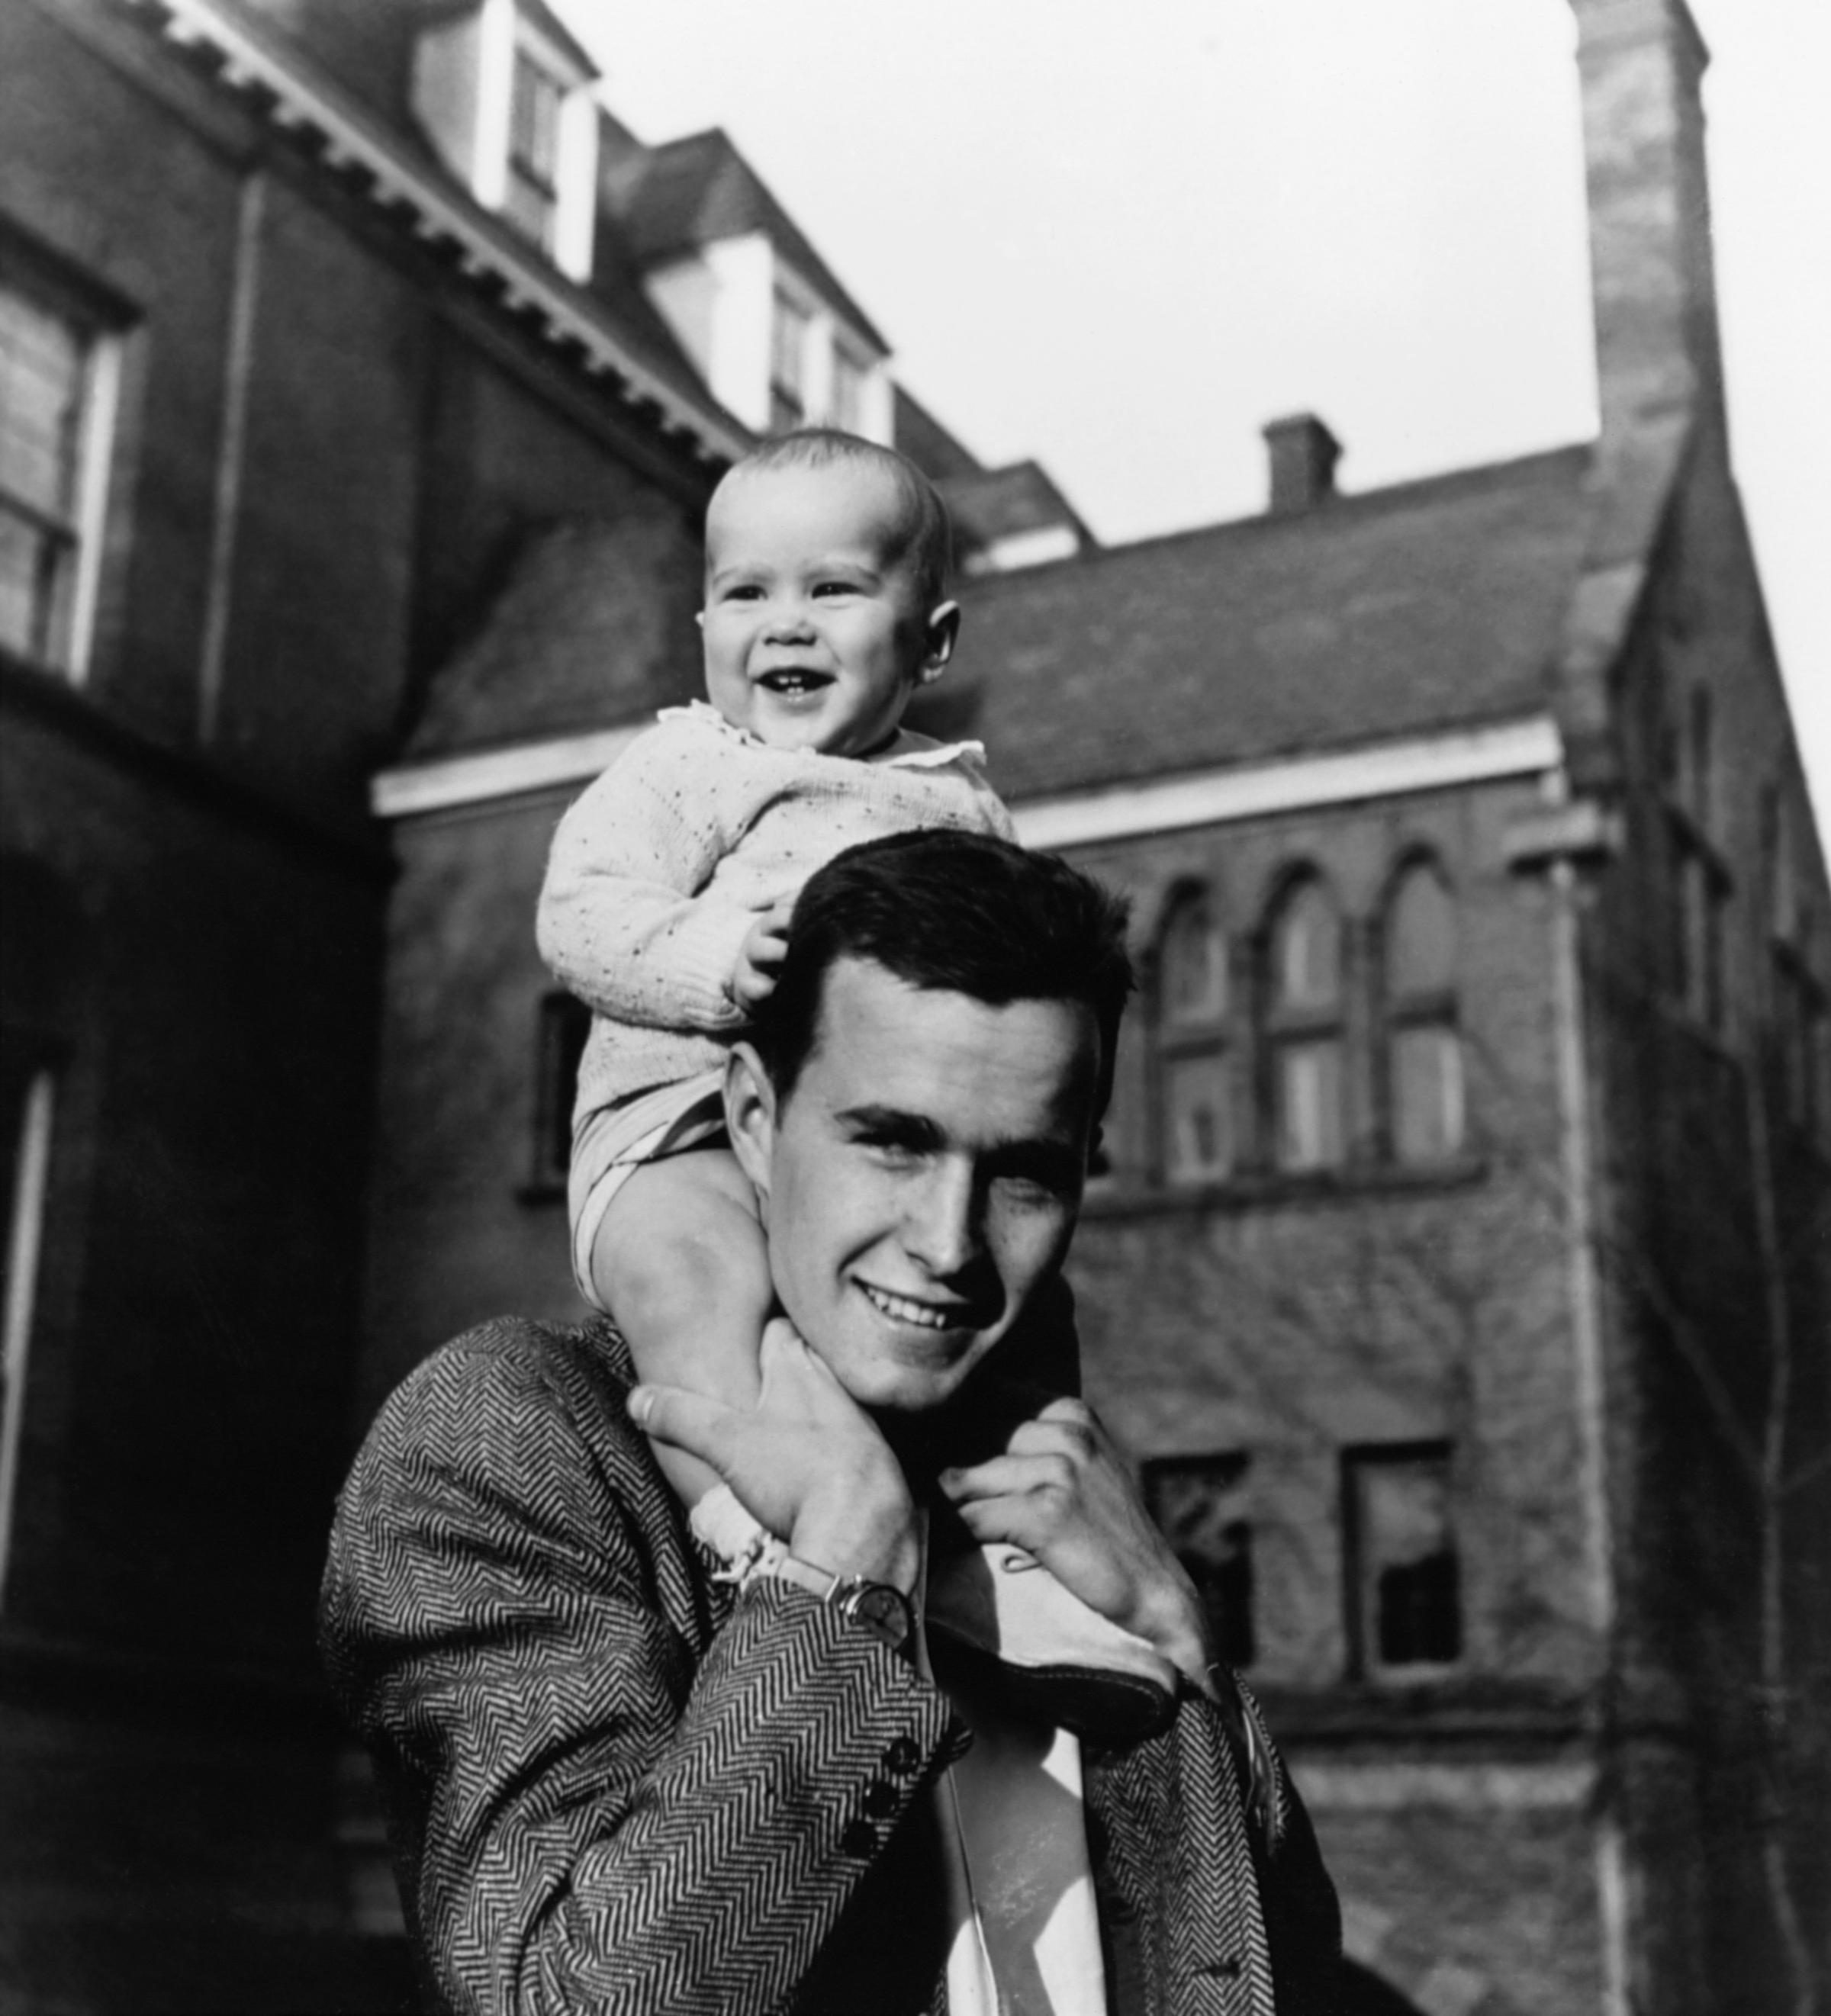 George H.W. Bush carries his infant son George W. Bush on his shoulders at Yale University in New Haven, Conn.